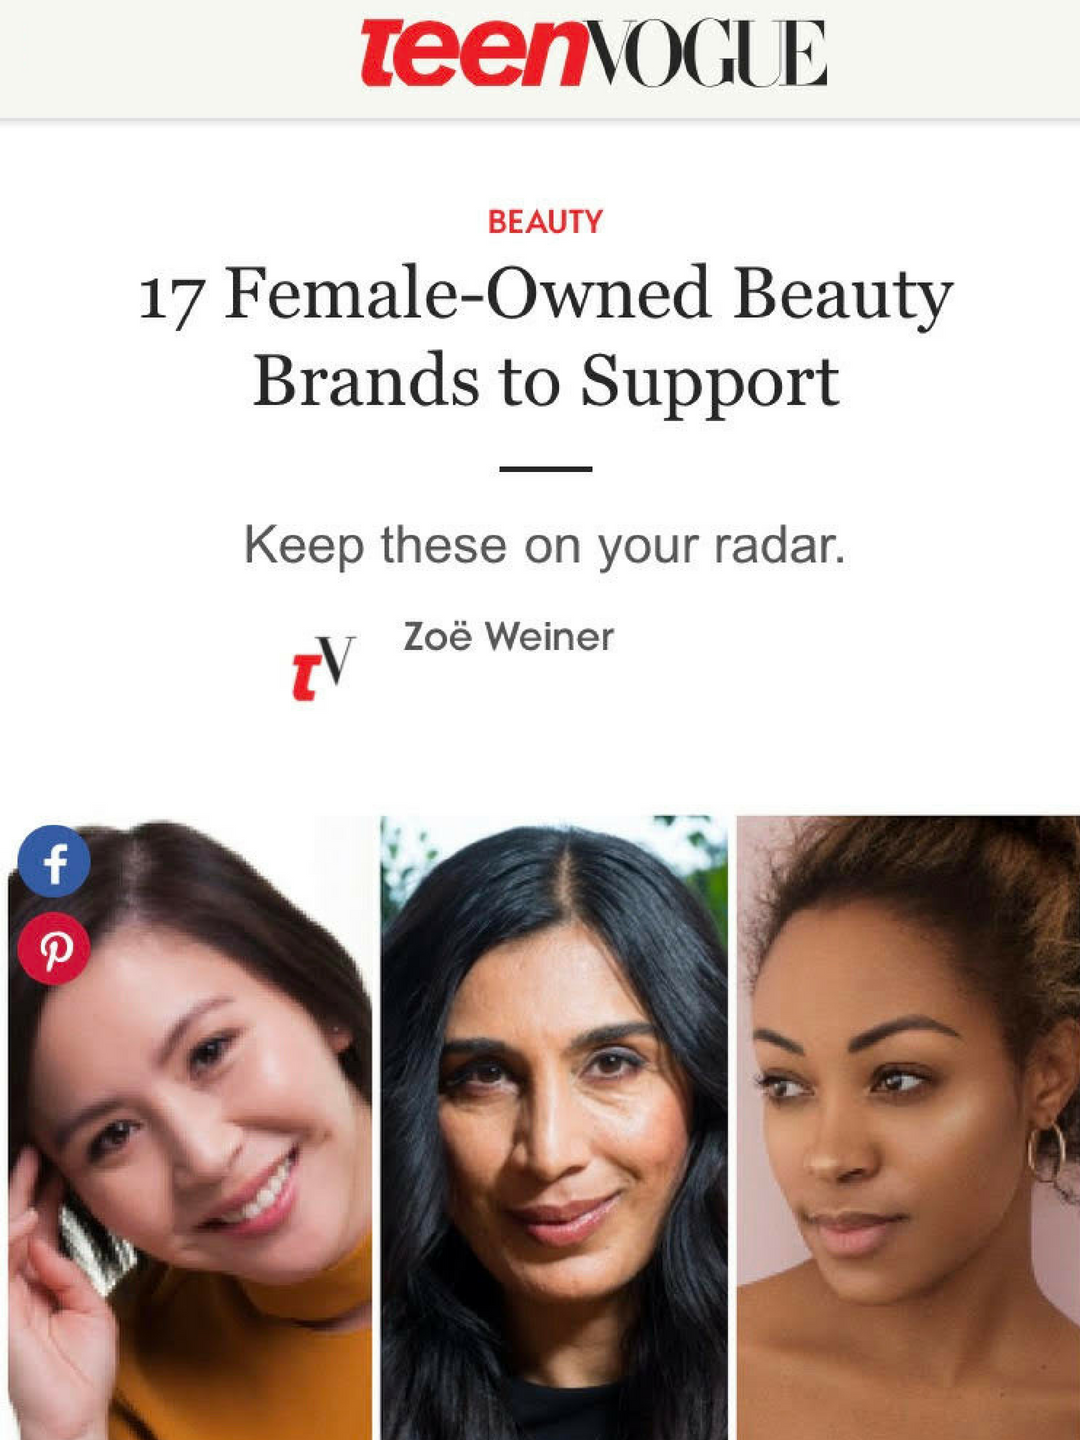 17 Female-Owned Beauty Brands to Support